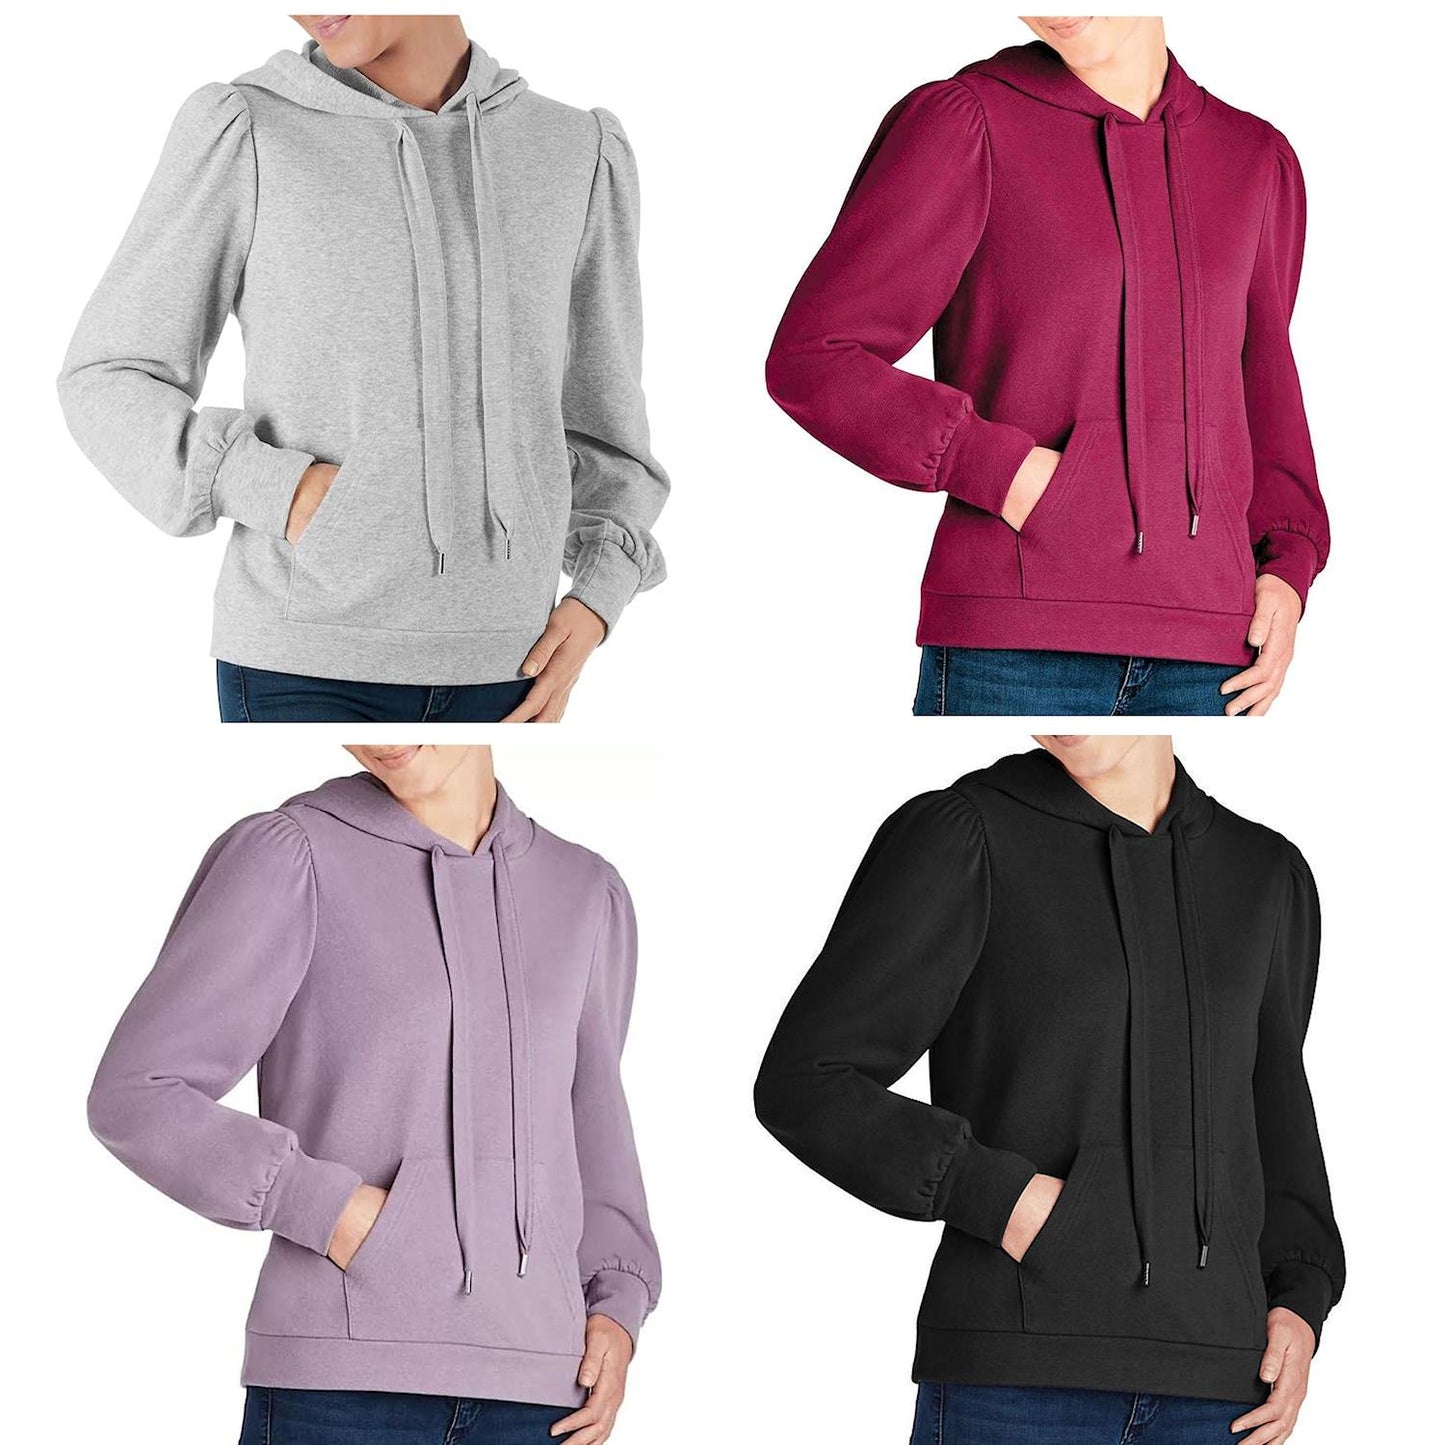 Member's Mark Ladies French Terry Puff Sleeve Fashion Hoodie